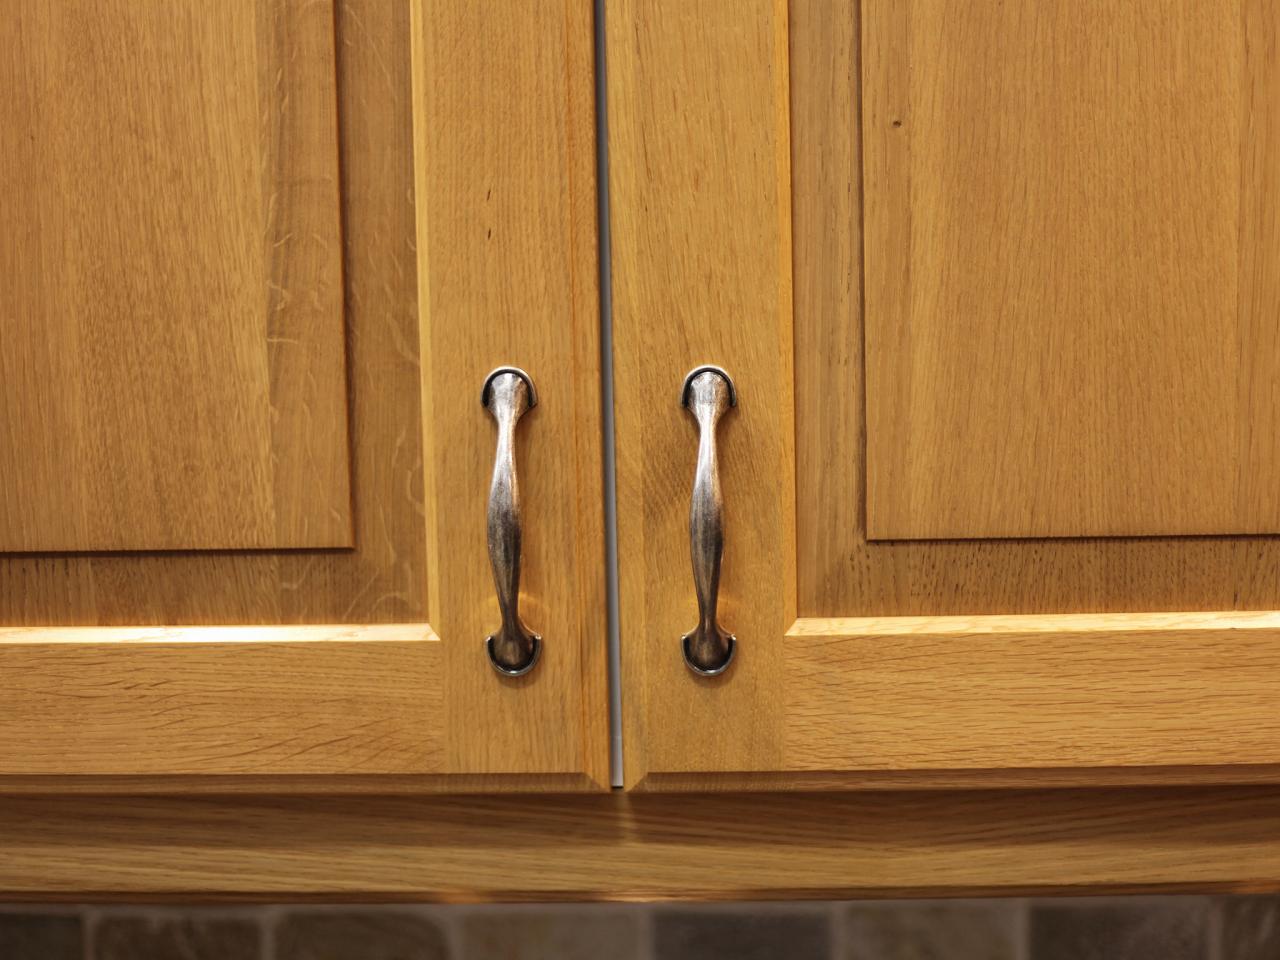 Kitchen Cabinet Handles Pictures, Where To Put Cabinet Handles On Doors